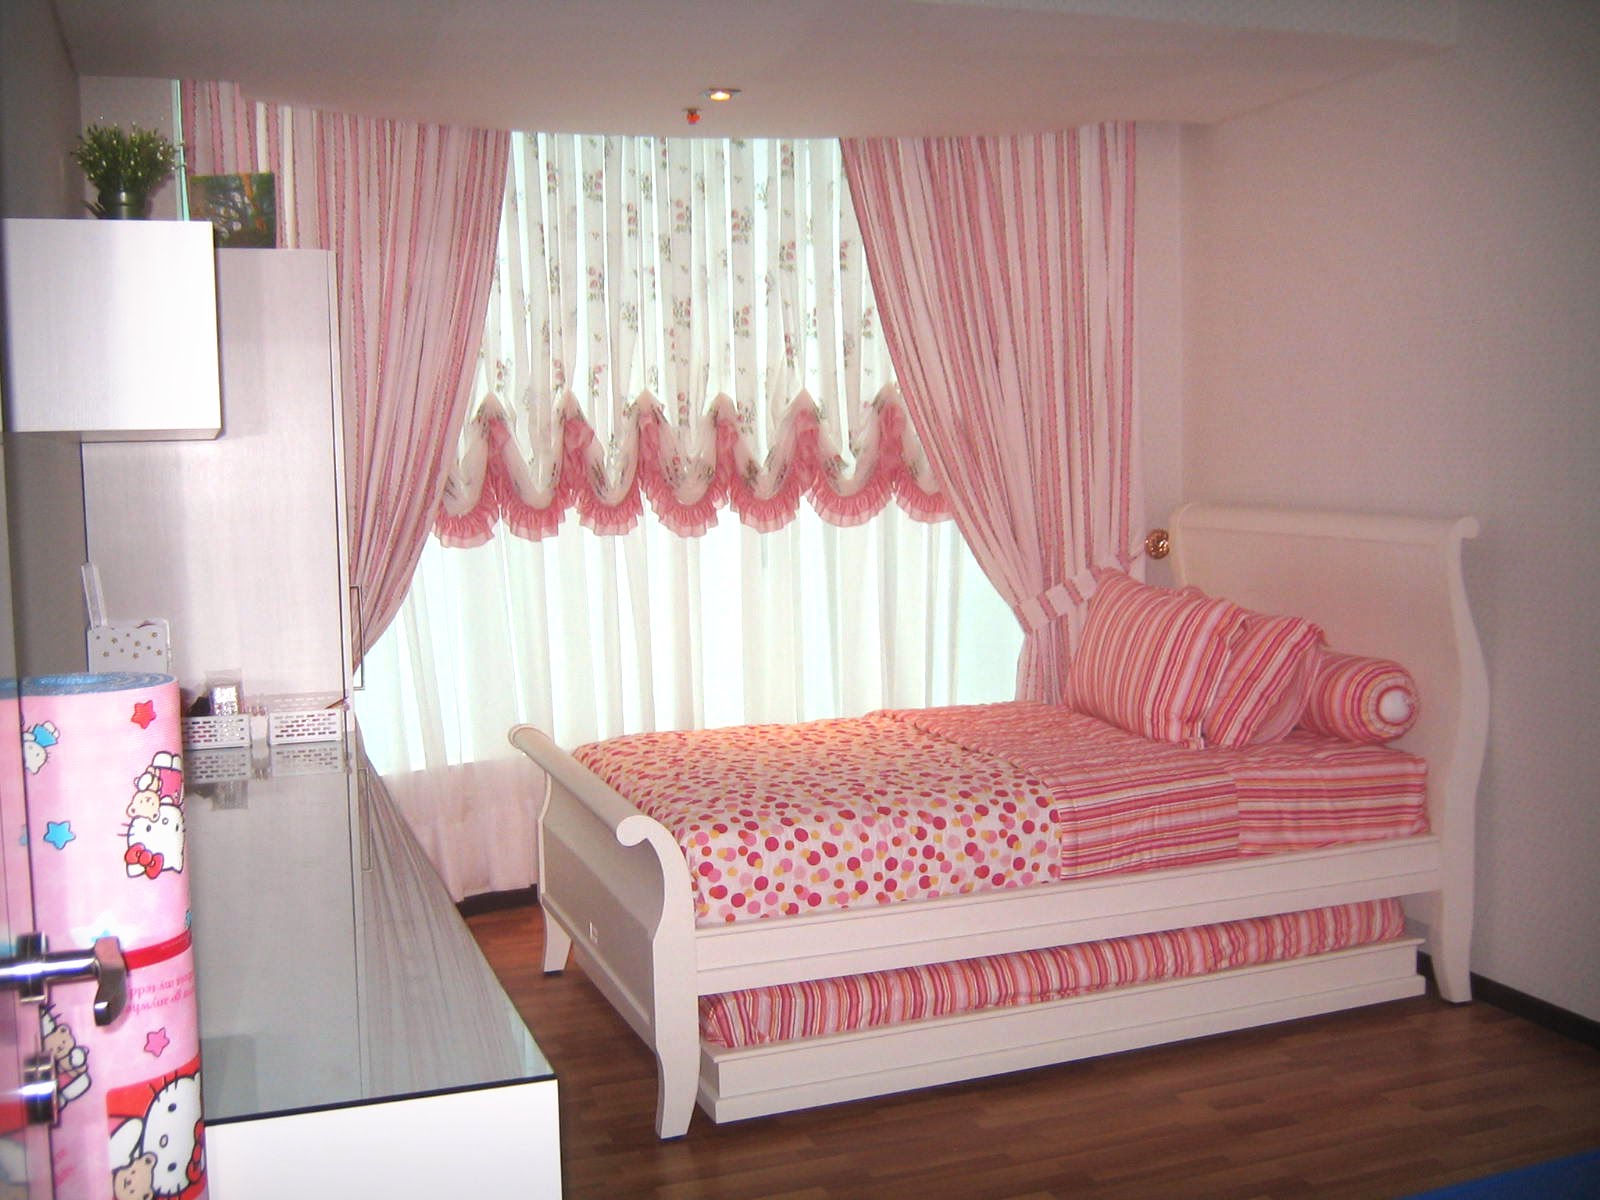 harga wallpaper dinding hello kitty,bed,furniture,bedroom,curtain,room